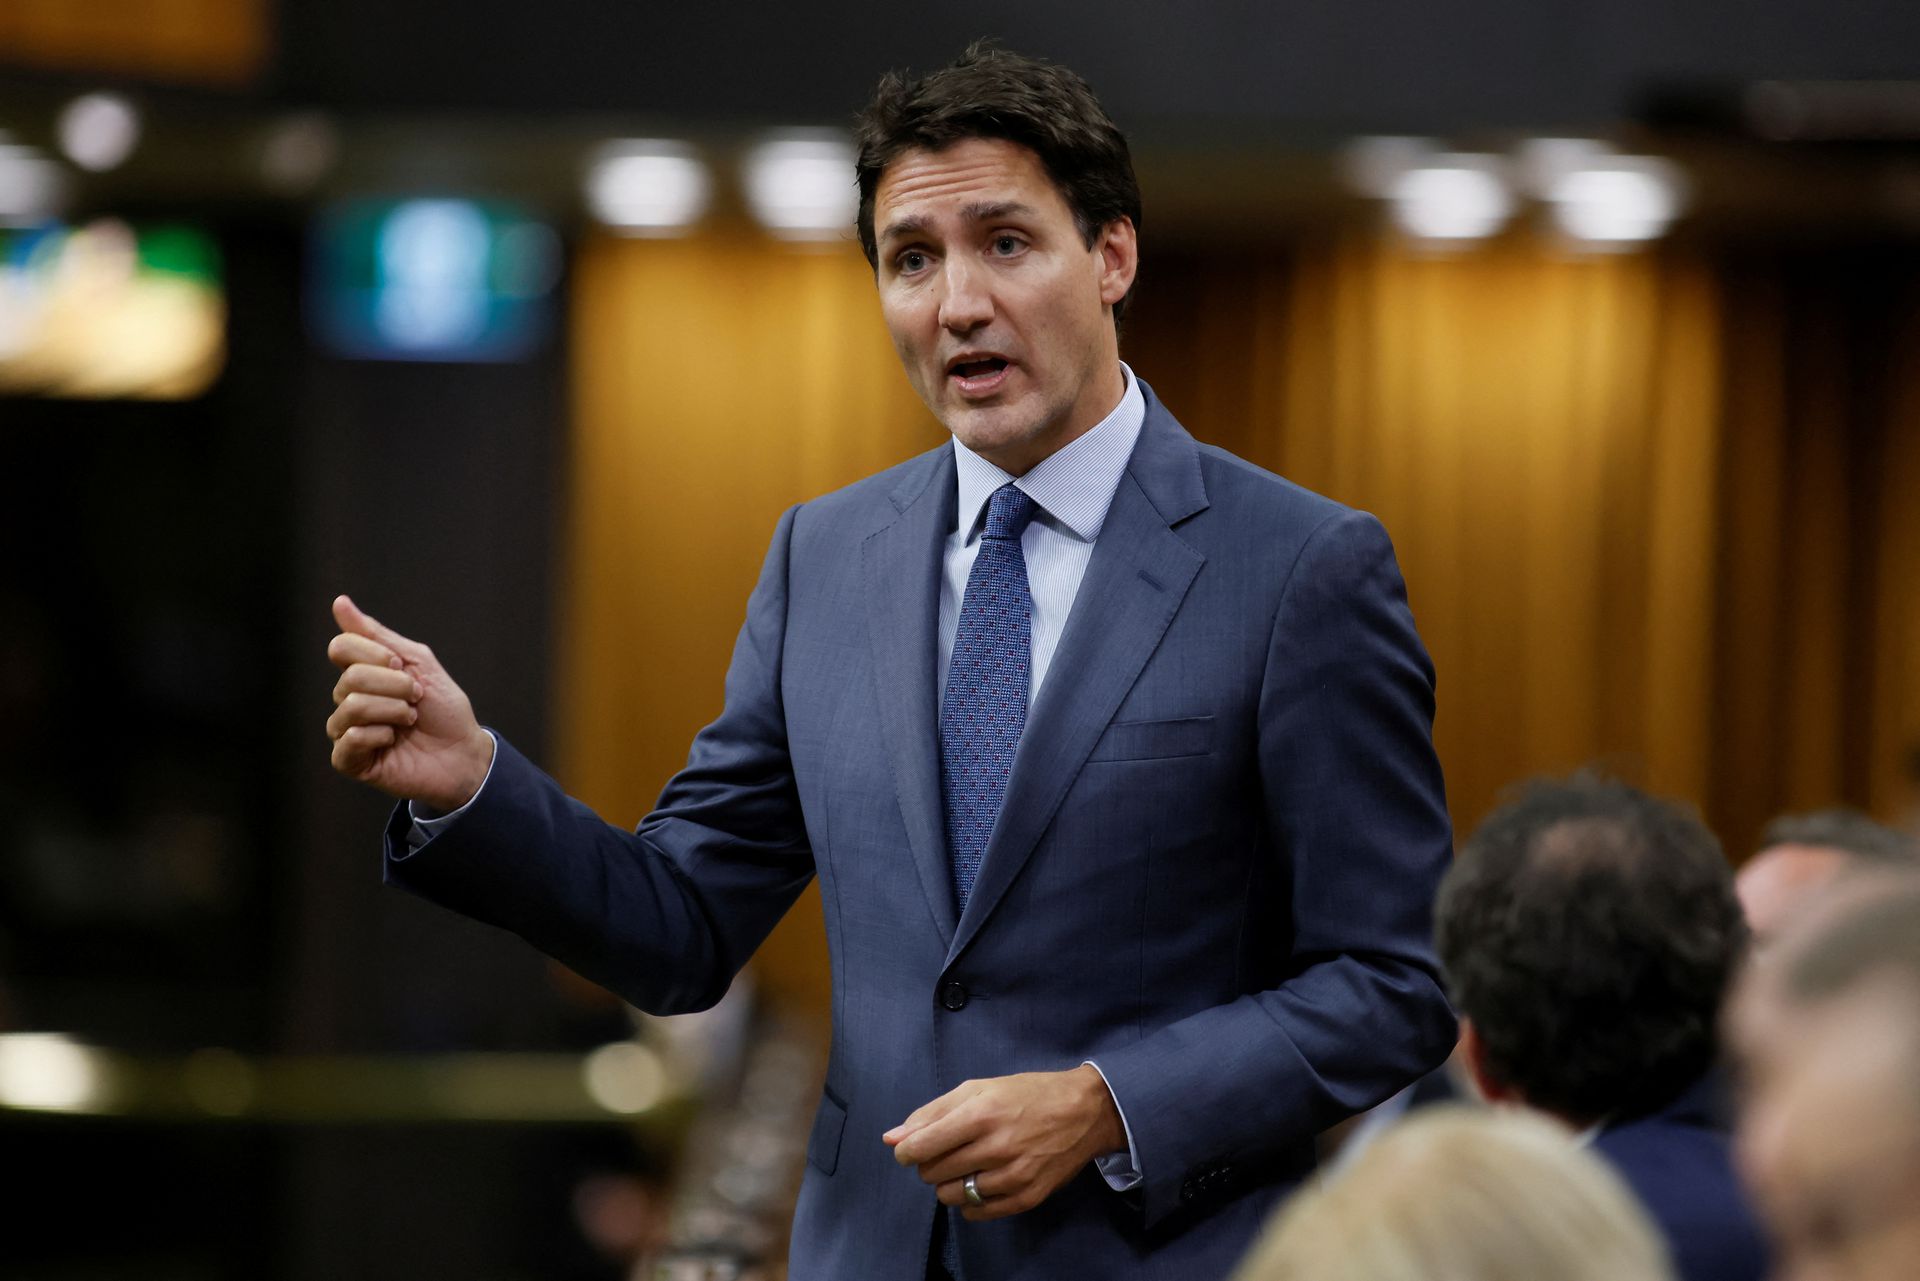 Canadian PM Justin Trudeau announced new sanctions against Iran’s IRGC and its top leaders, including over 10,000 officers and senior members.